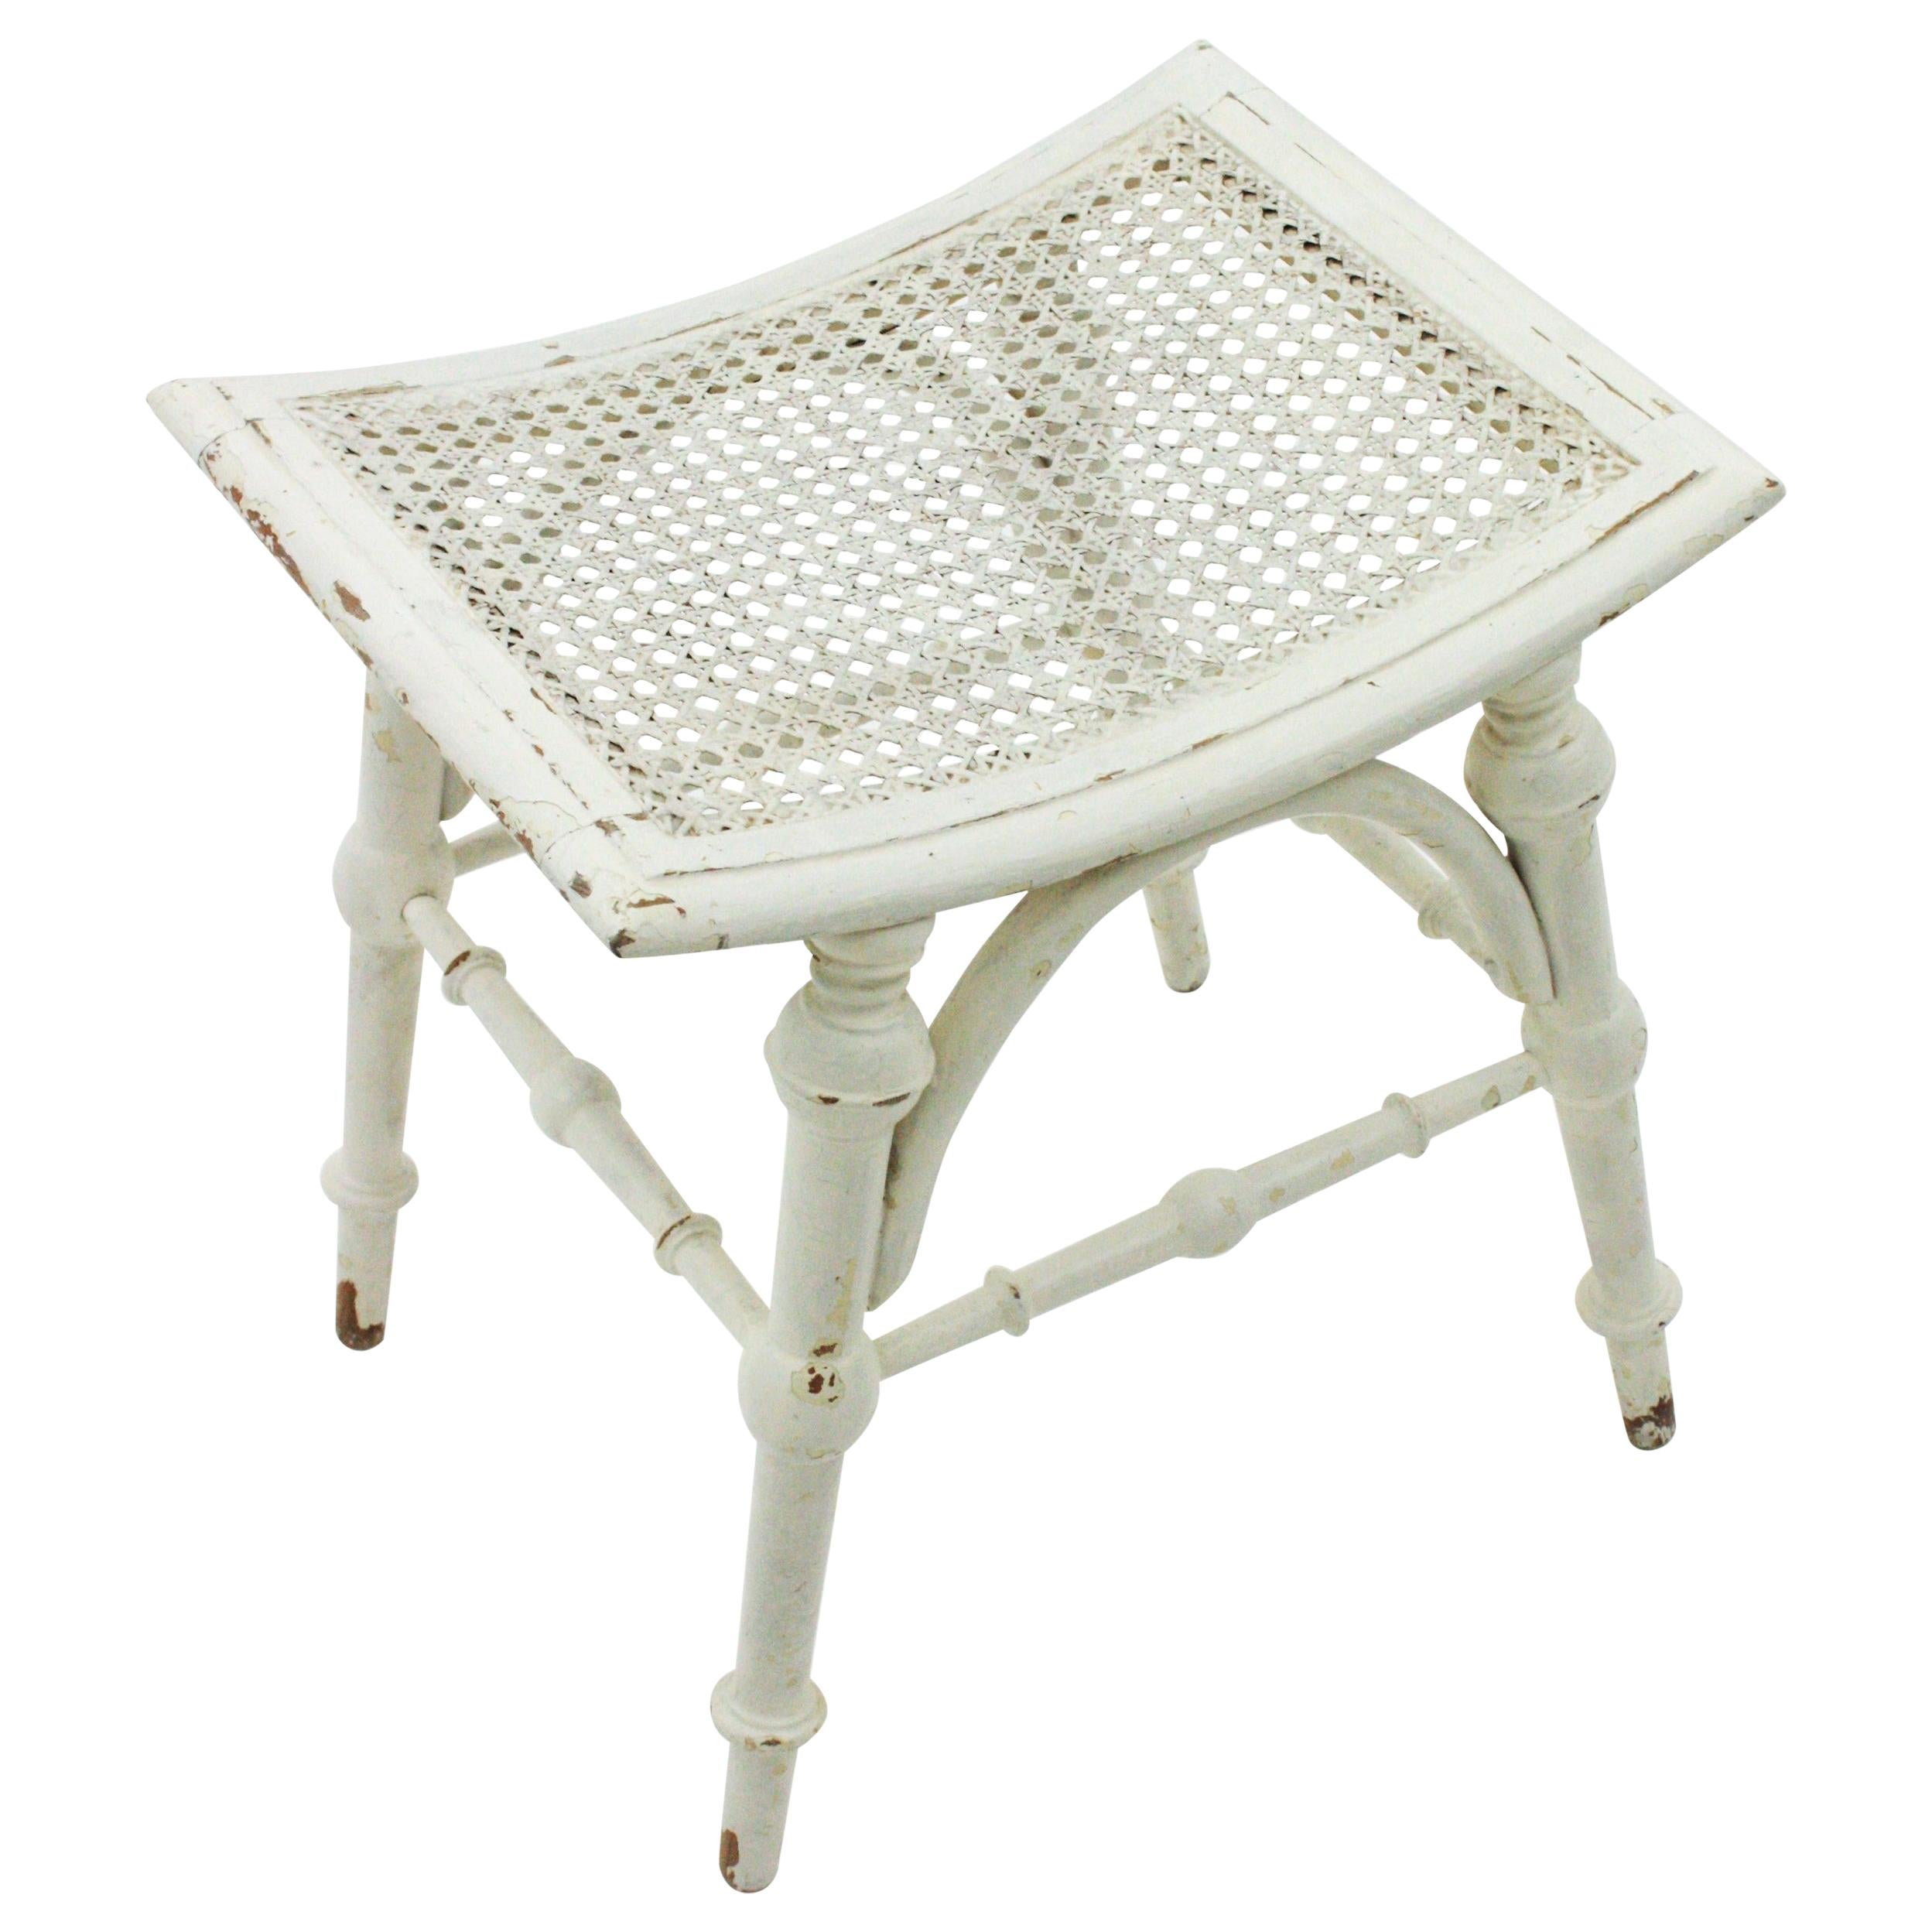 Lovely wooden Chippendale stool or side table with woven wicker top, 1920s-1930s.
Tuned wood structure with four legs and stretchers joining them. It has a terrific aged patina in white color. The cane seat is in good condition.
This stool can be